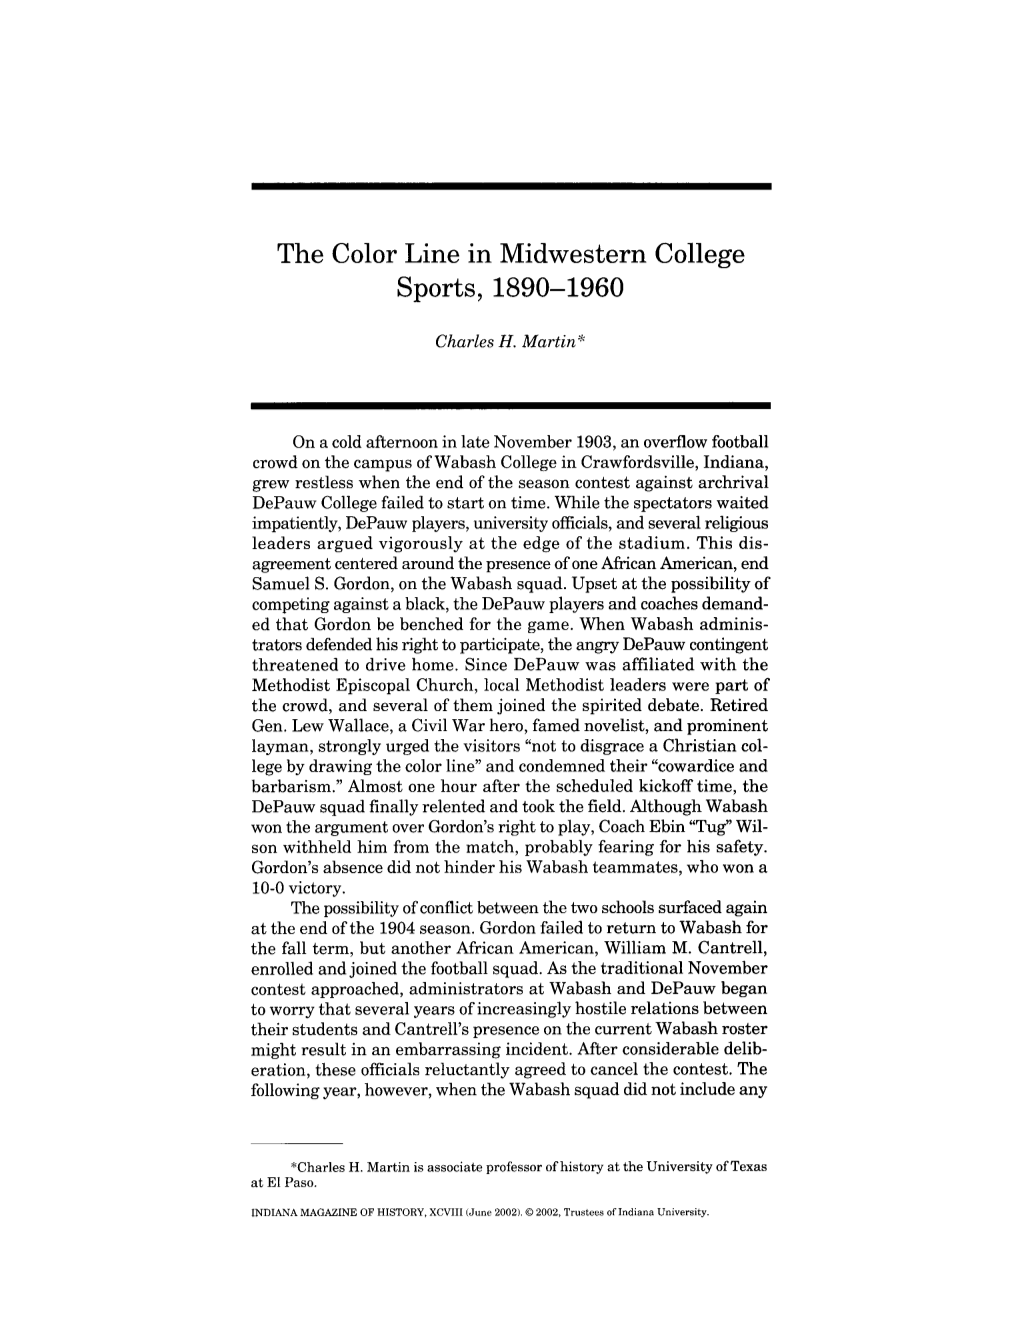 The Color Line in Midwestern College Sports, 1890-1960